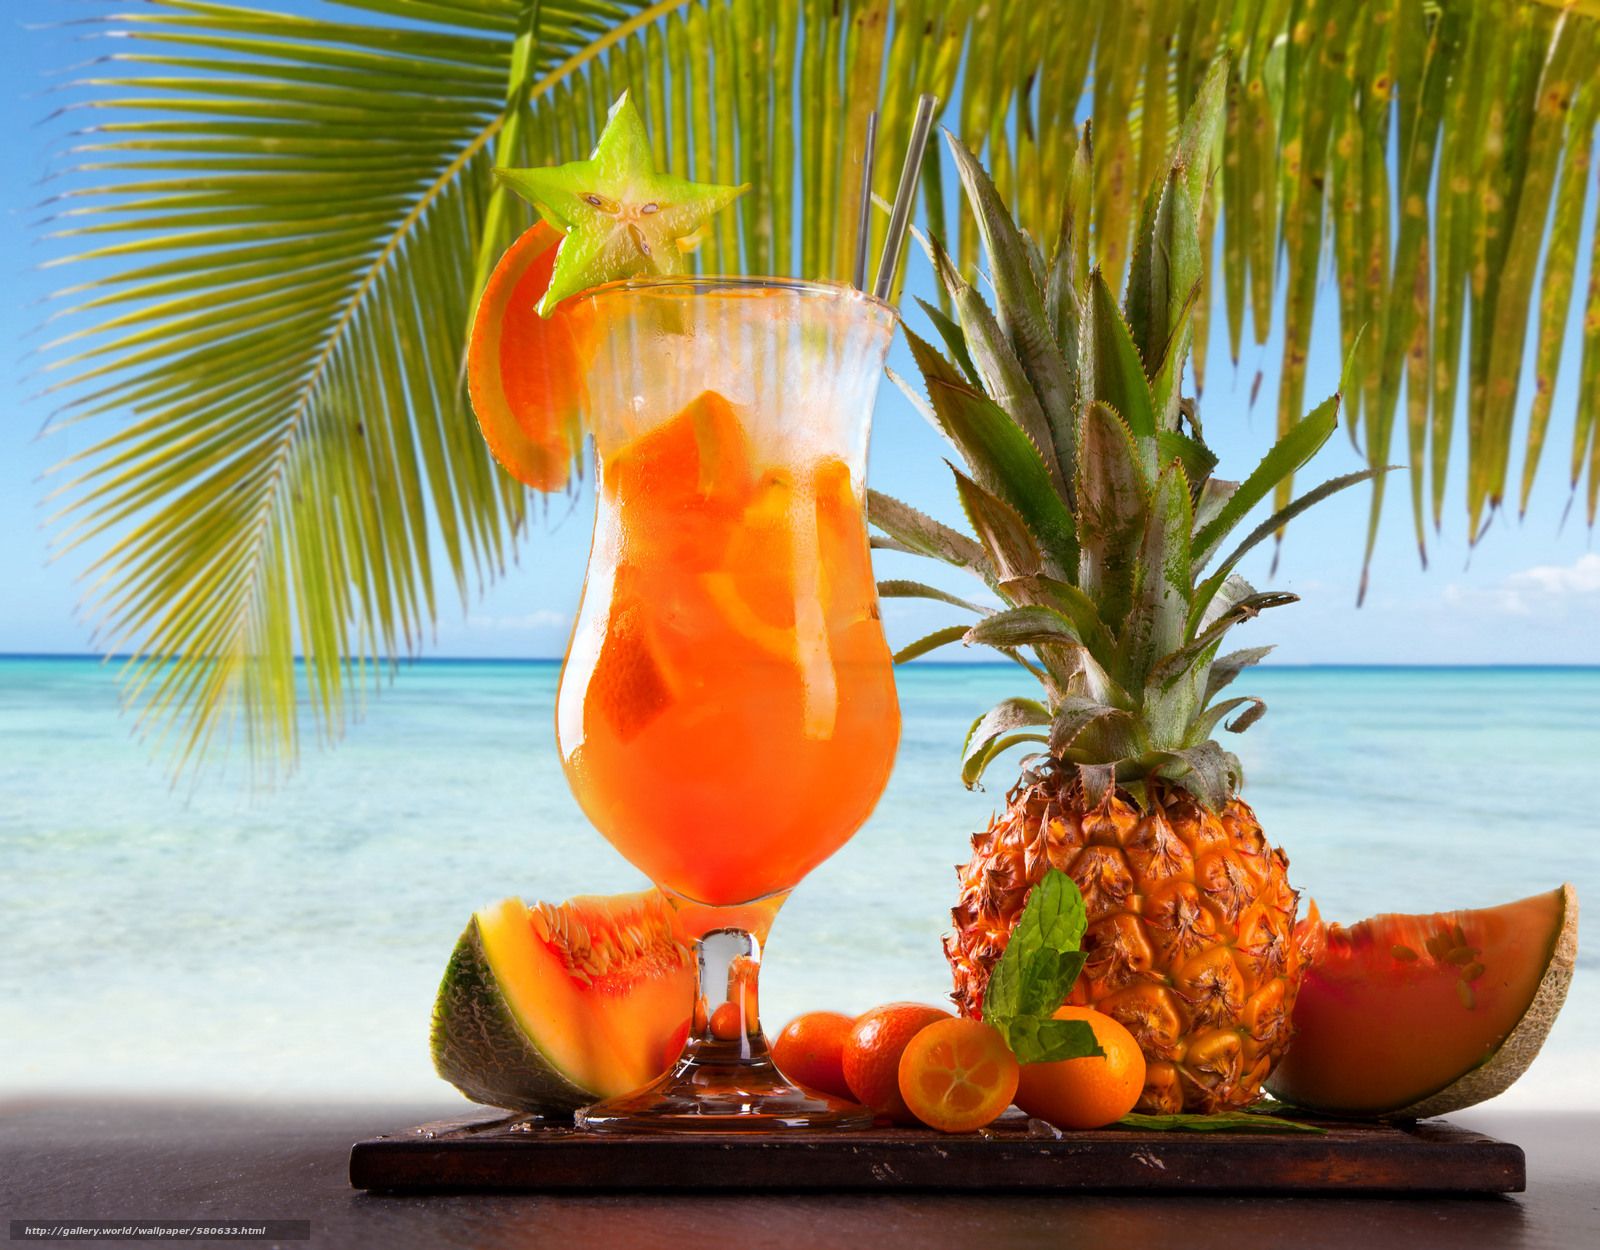 Download wallpaper summer cocktail, palm, pineapple, fruit free